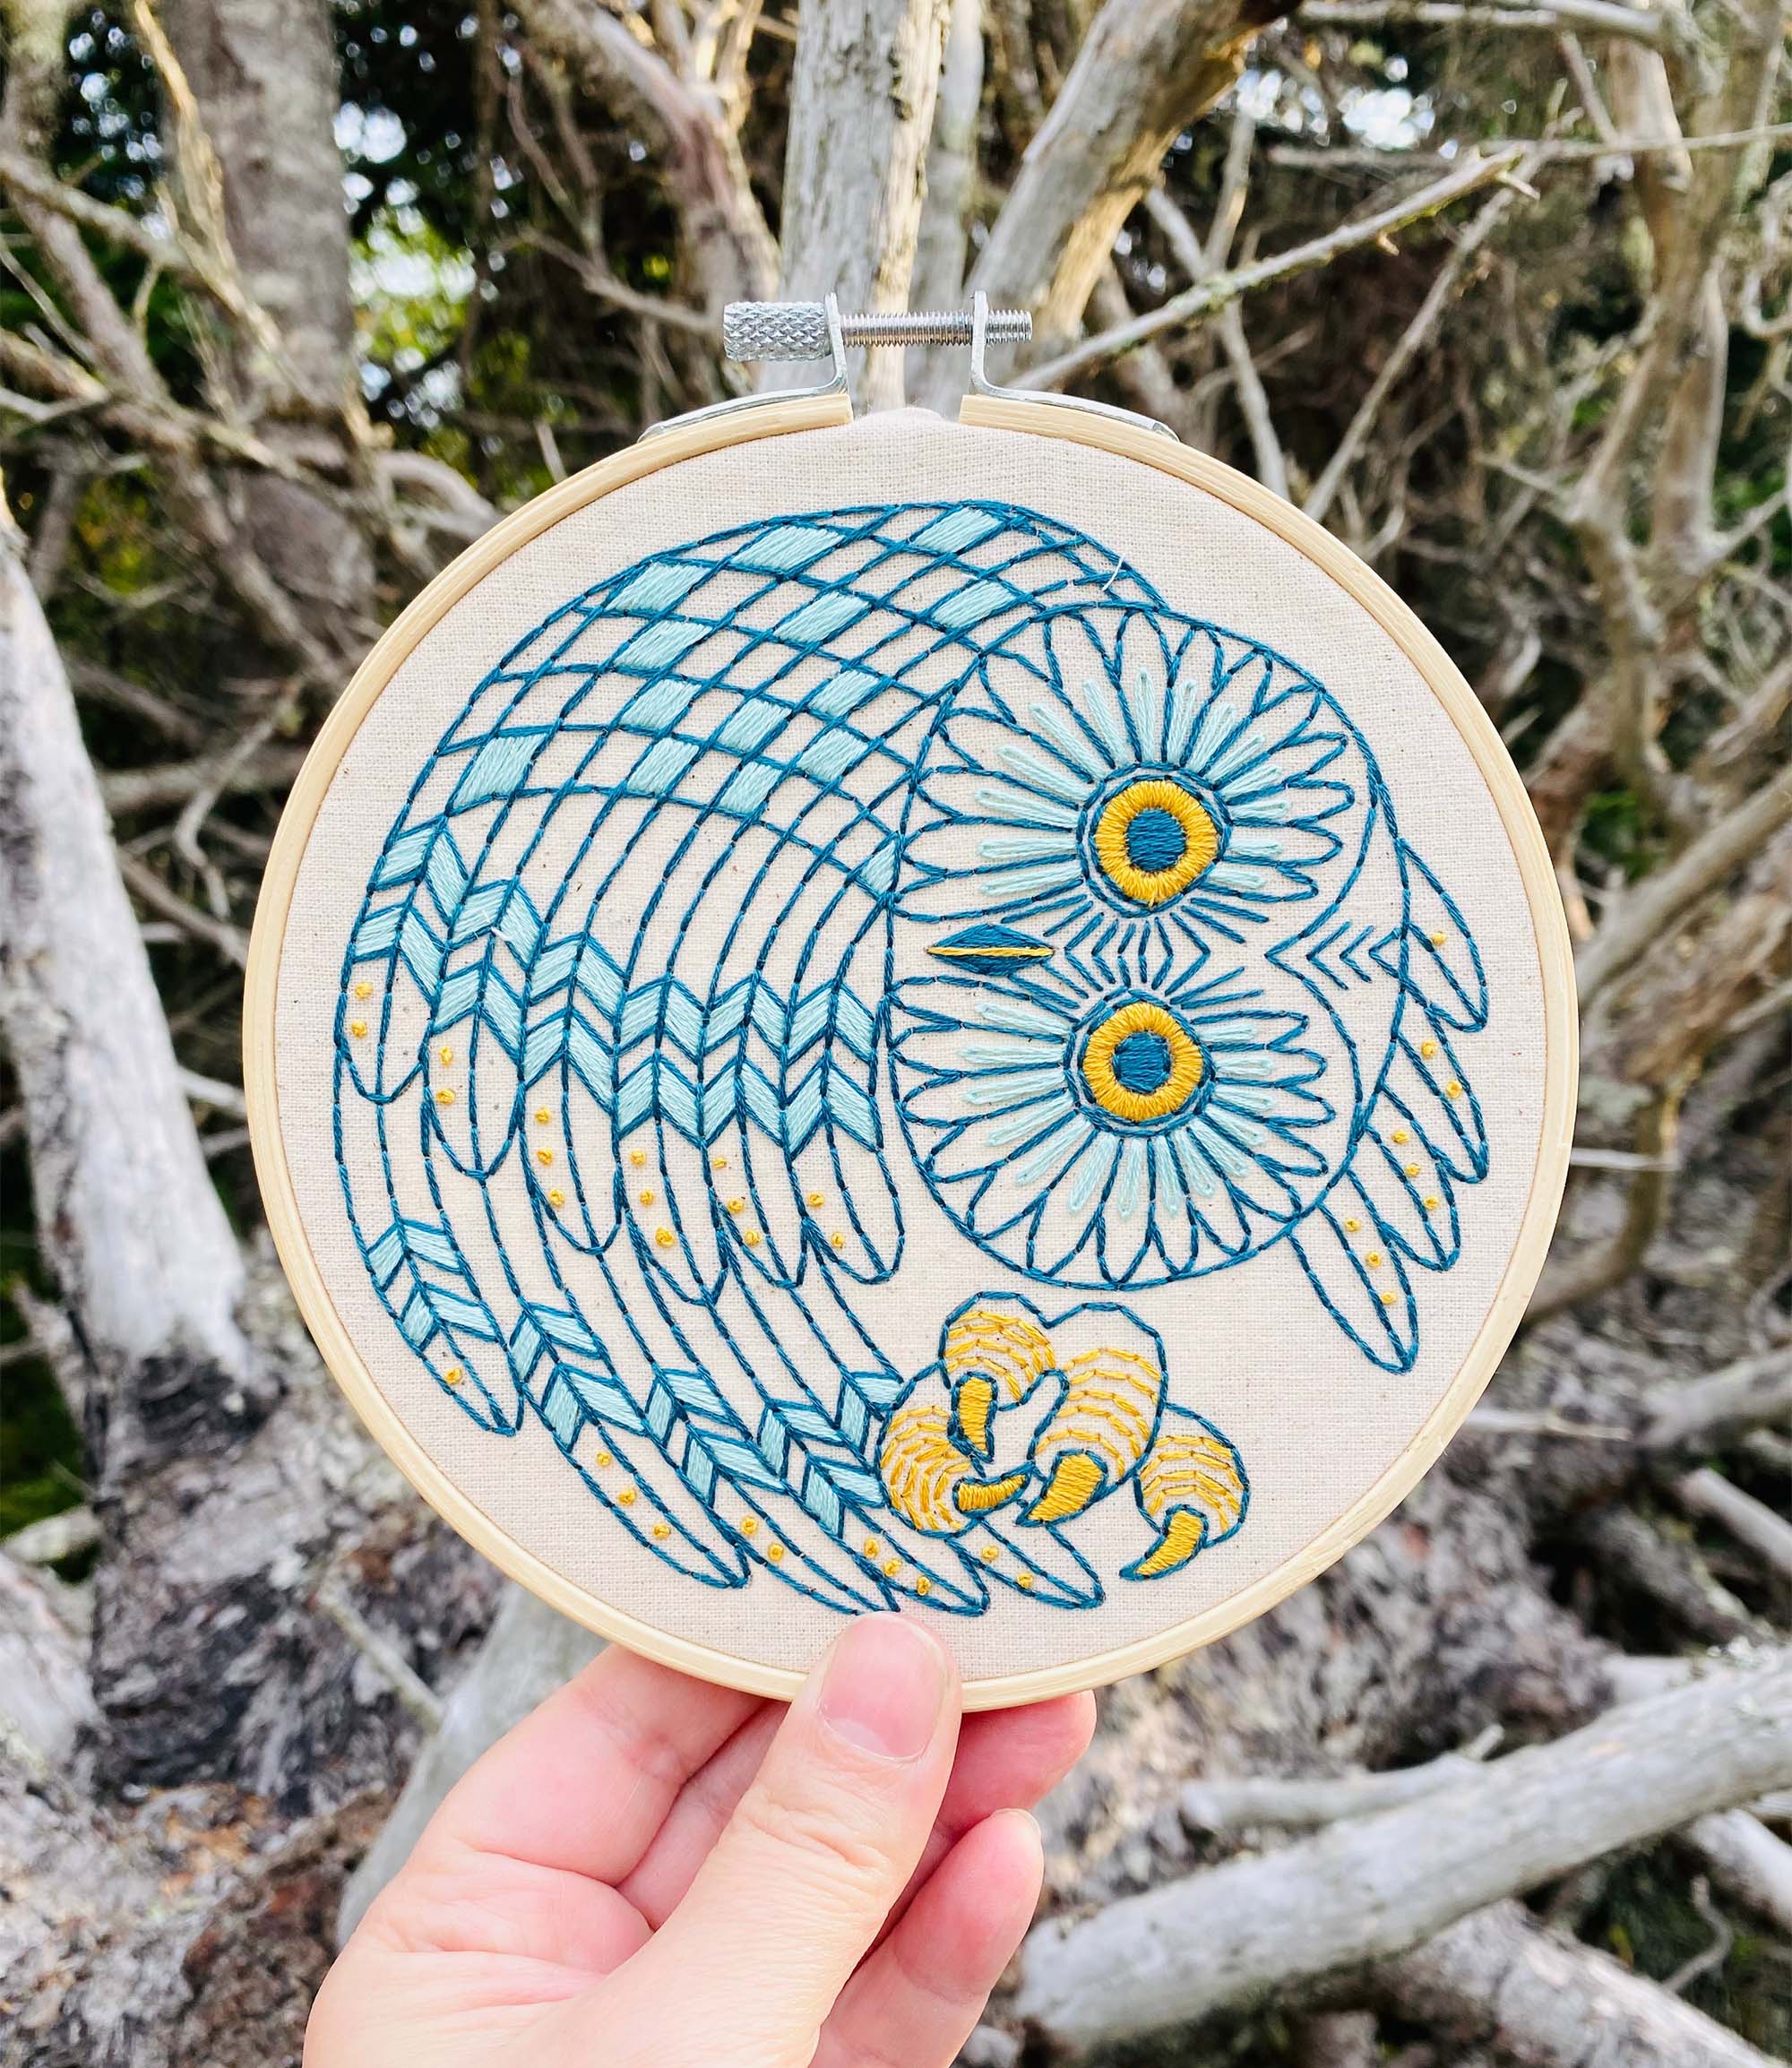 blue and yellow embroidered owl in frame against nature background